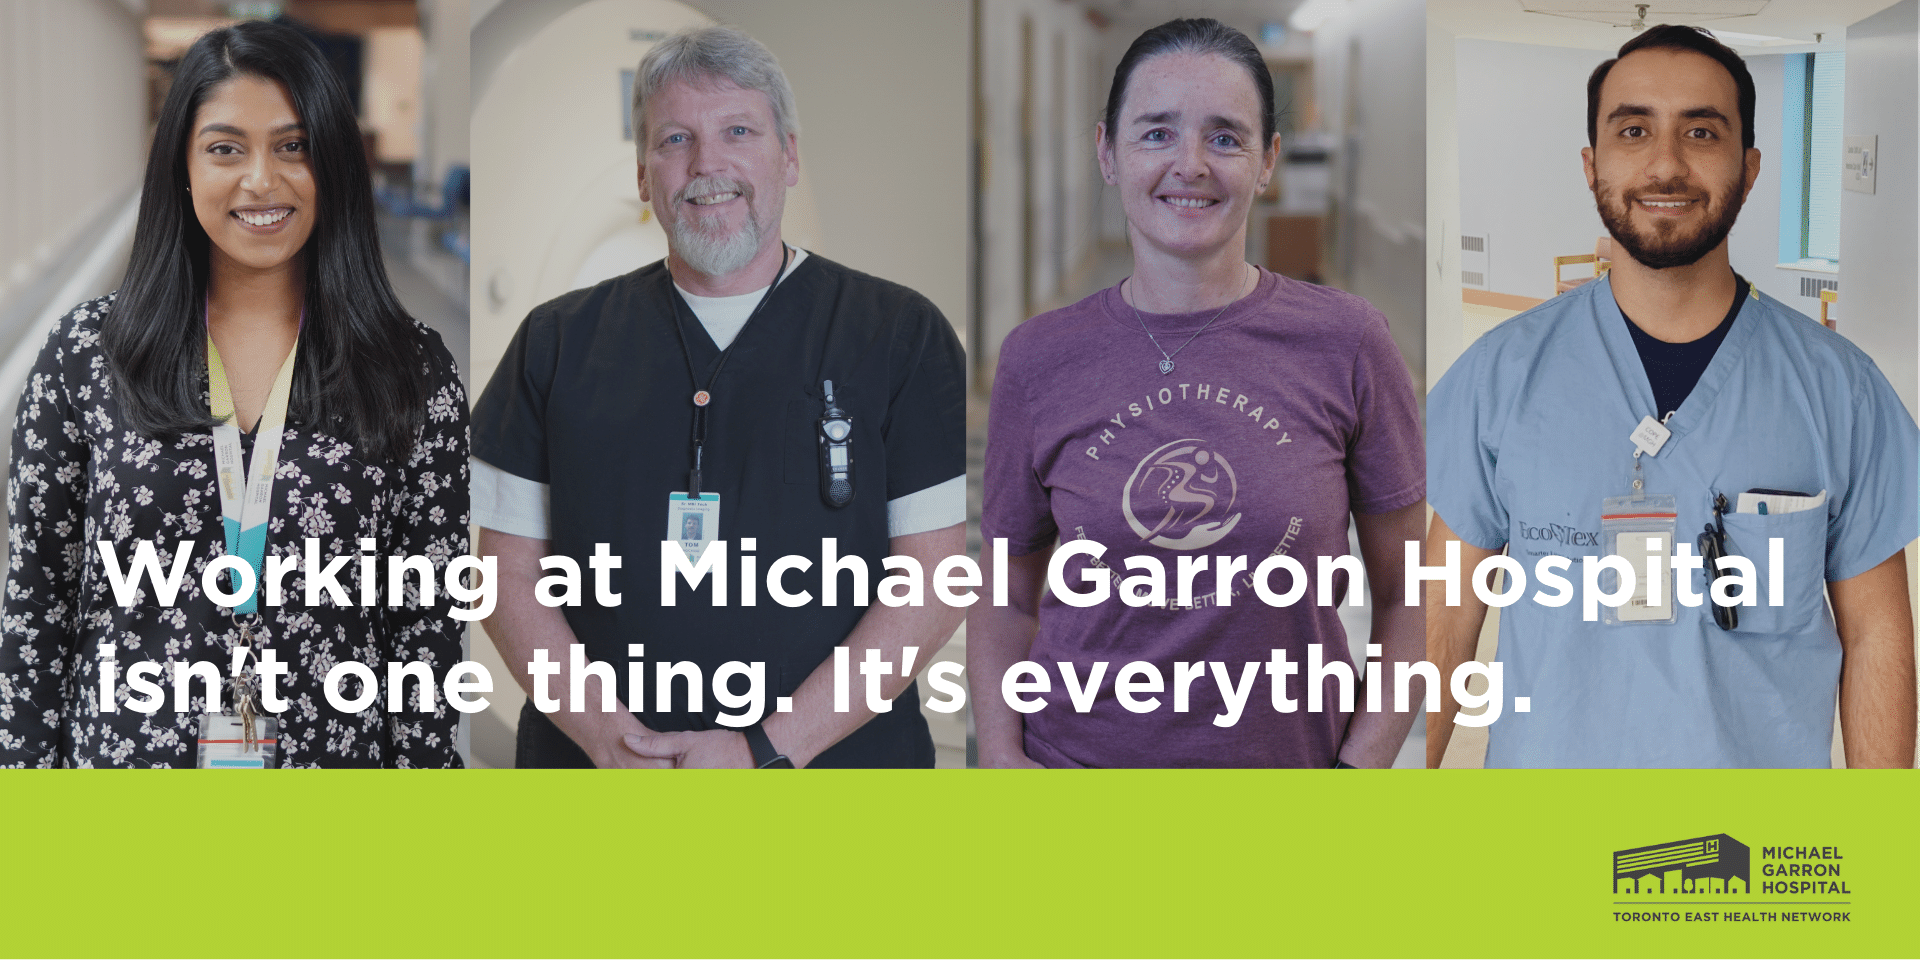 Four MGH staff members smiling with the text, "Working at Michael Garron Hospital isn't one thing, it's everything."